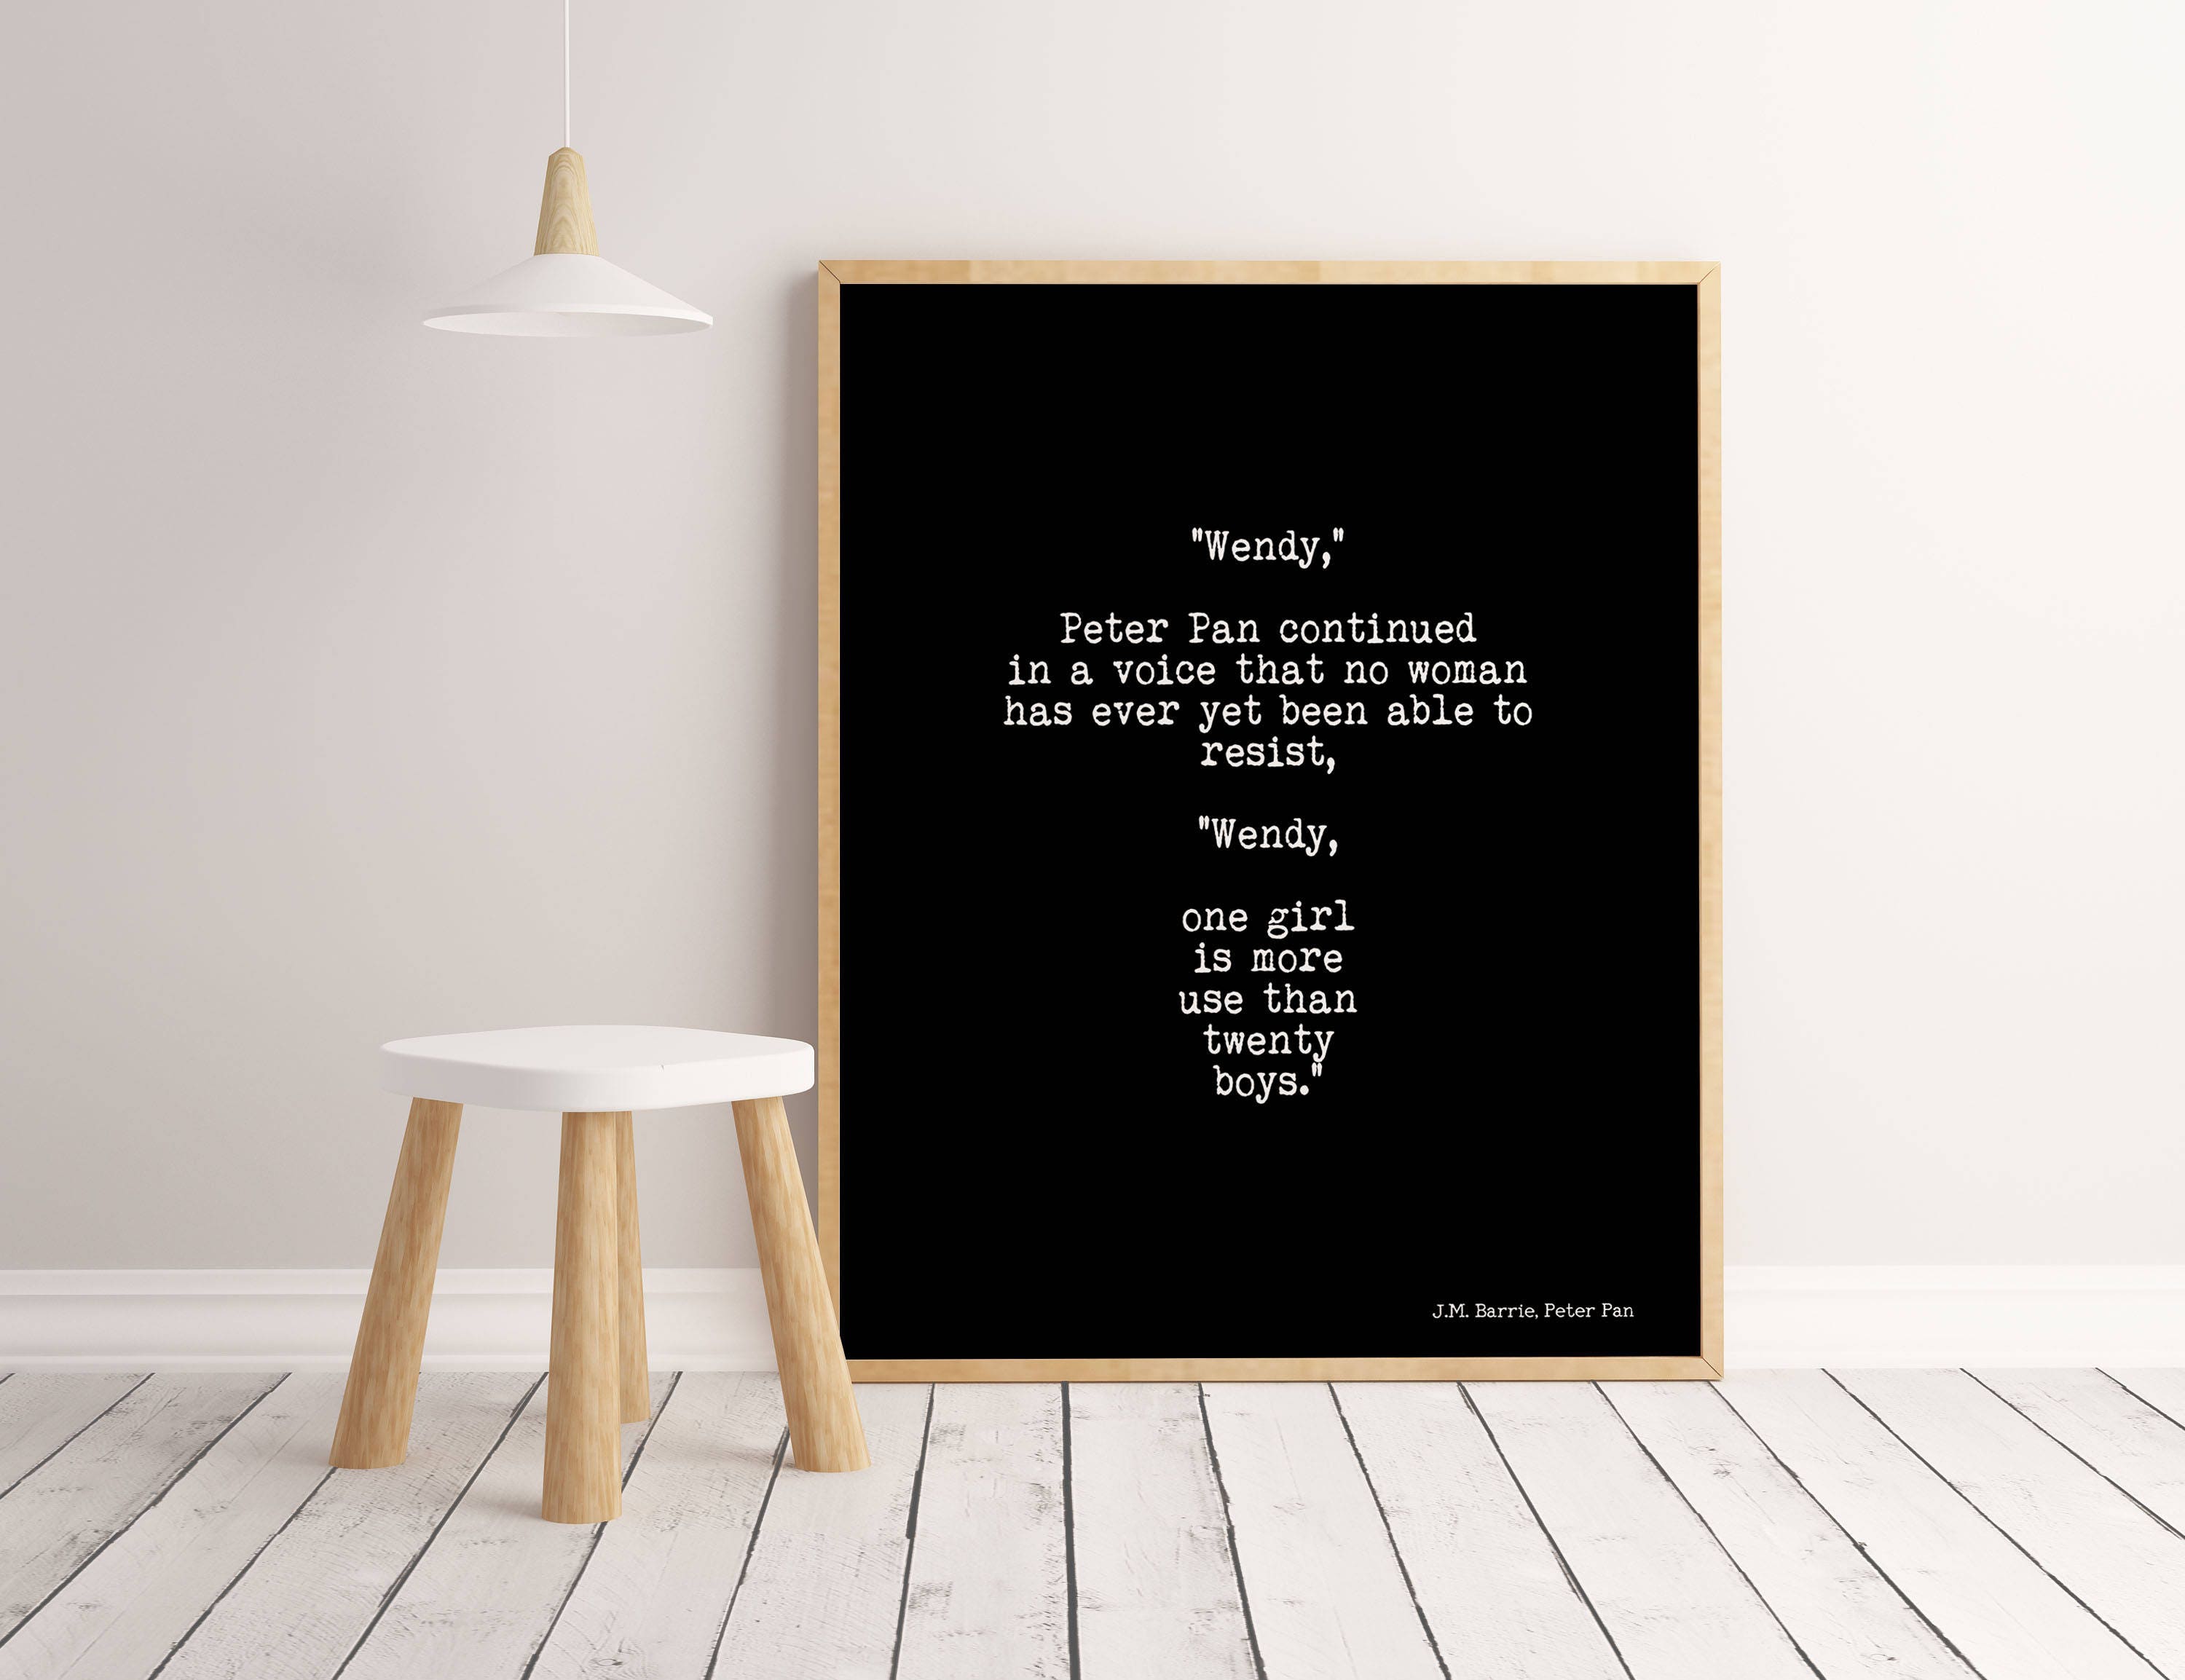 Peter Pan One Girl Is More Use Than Twenty Boys Girl Power Quote Wall Art Prints, Unframed Wall Decor in Black and White